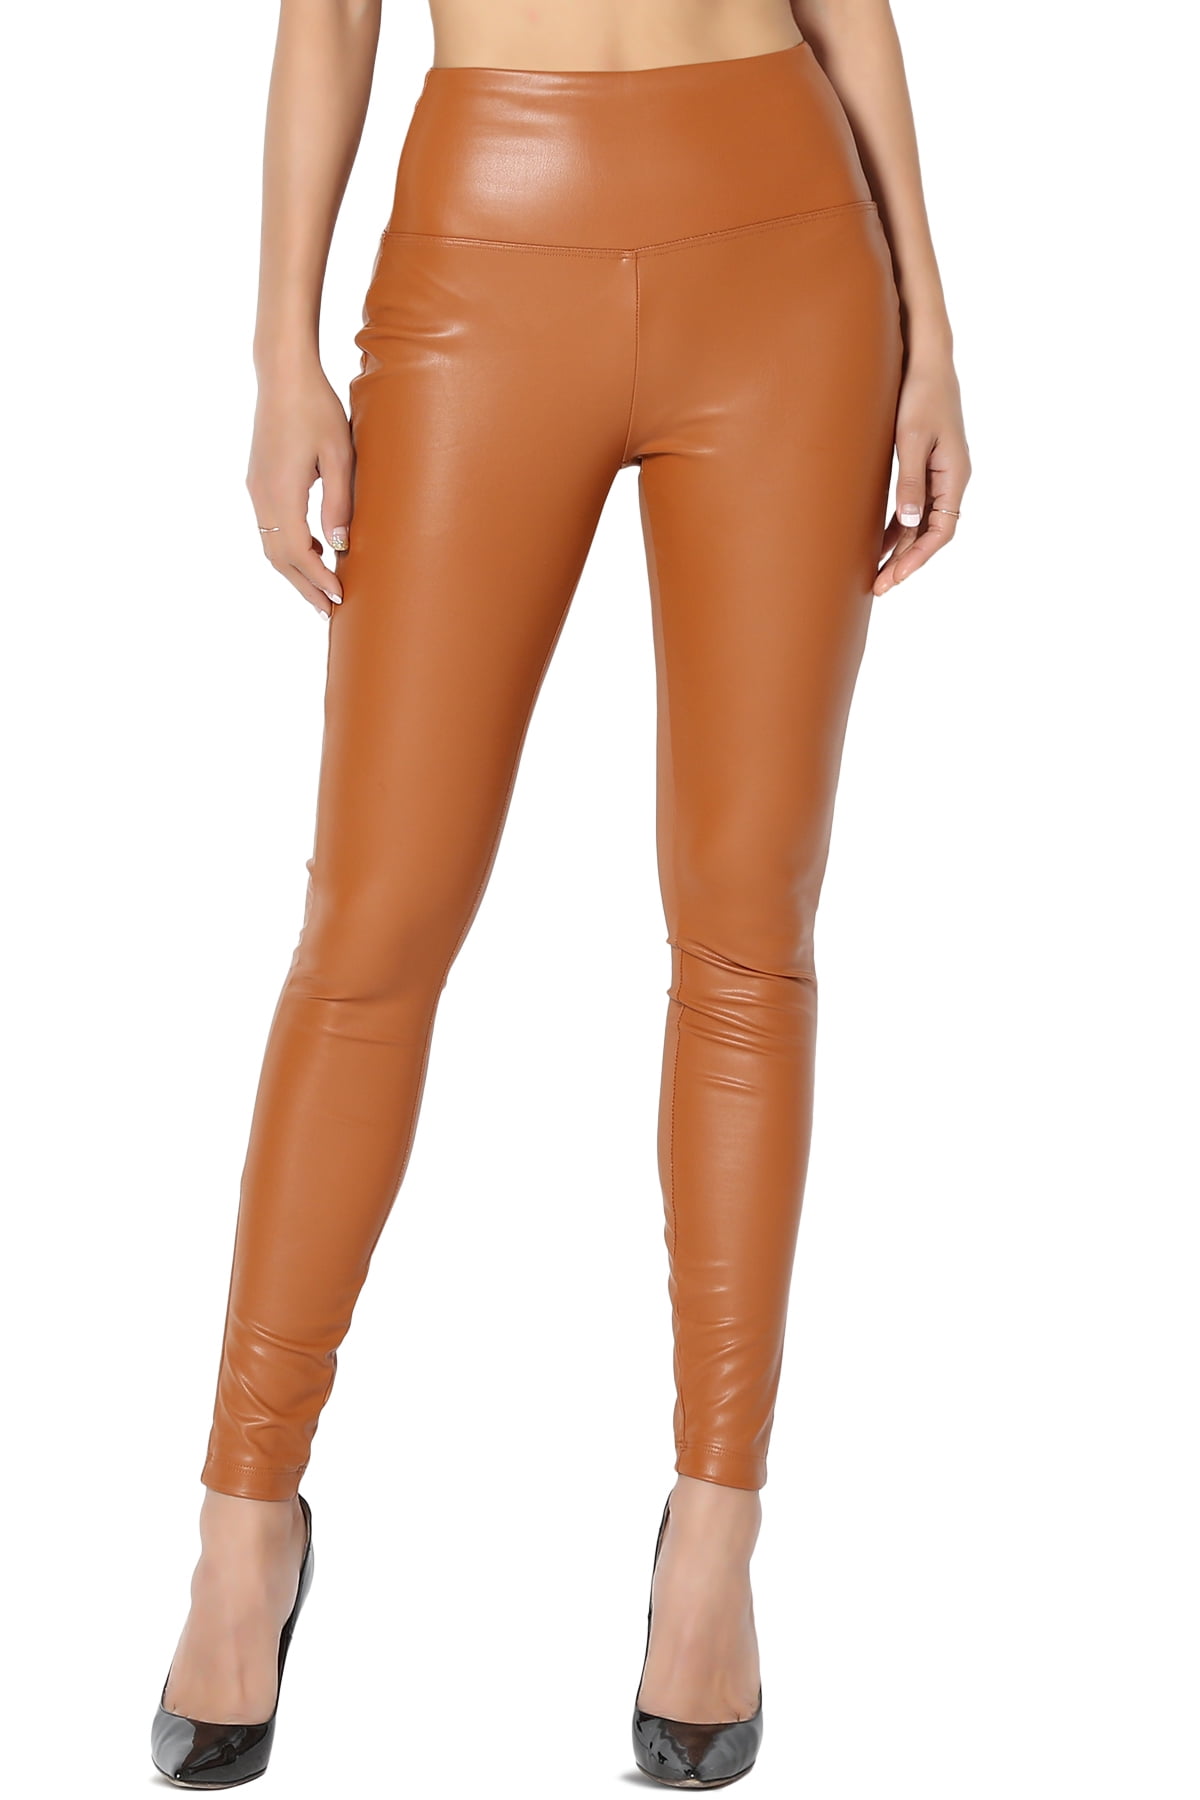 Themogan Women S Sexy Faux Leather Wide Band High Waist Leggings Tights Pants